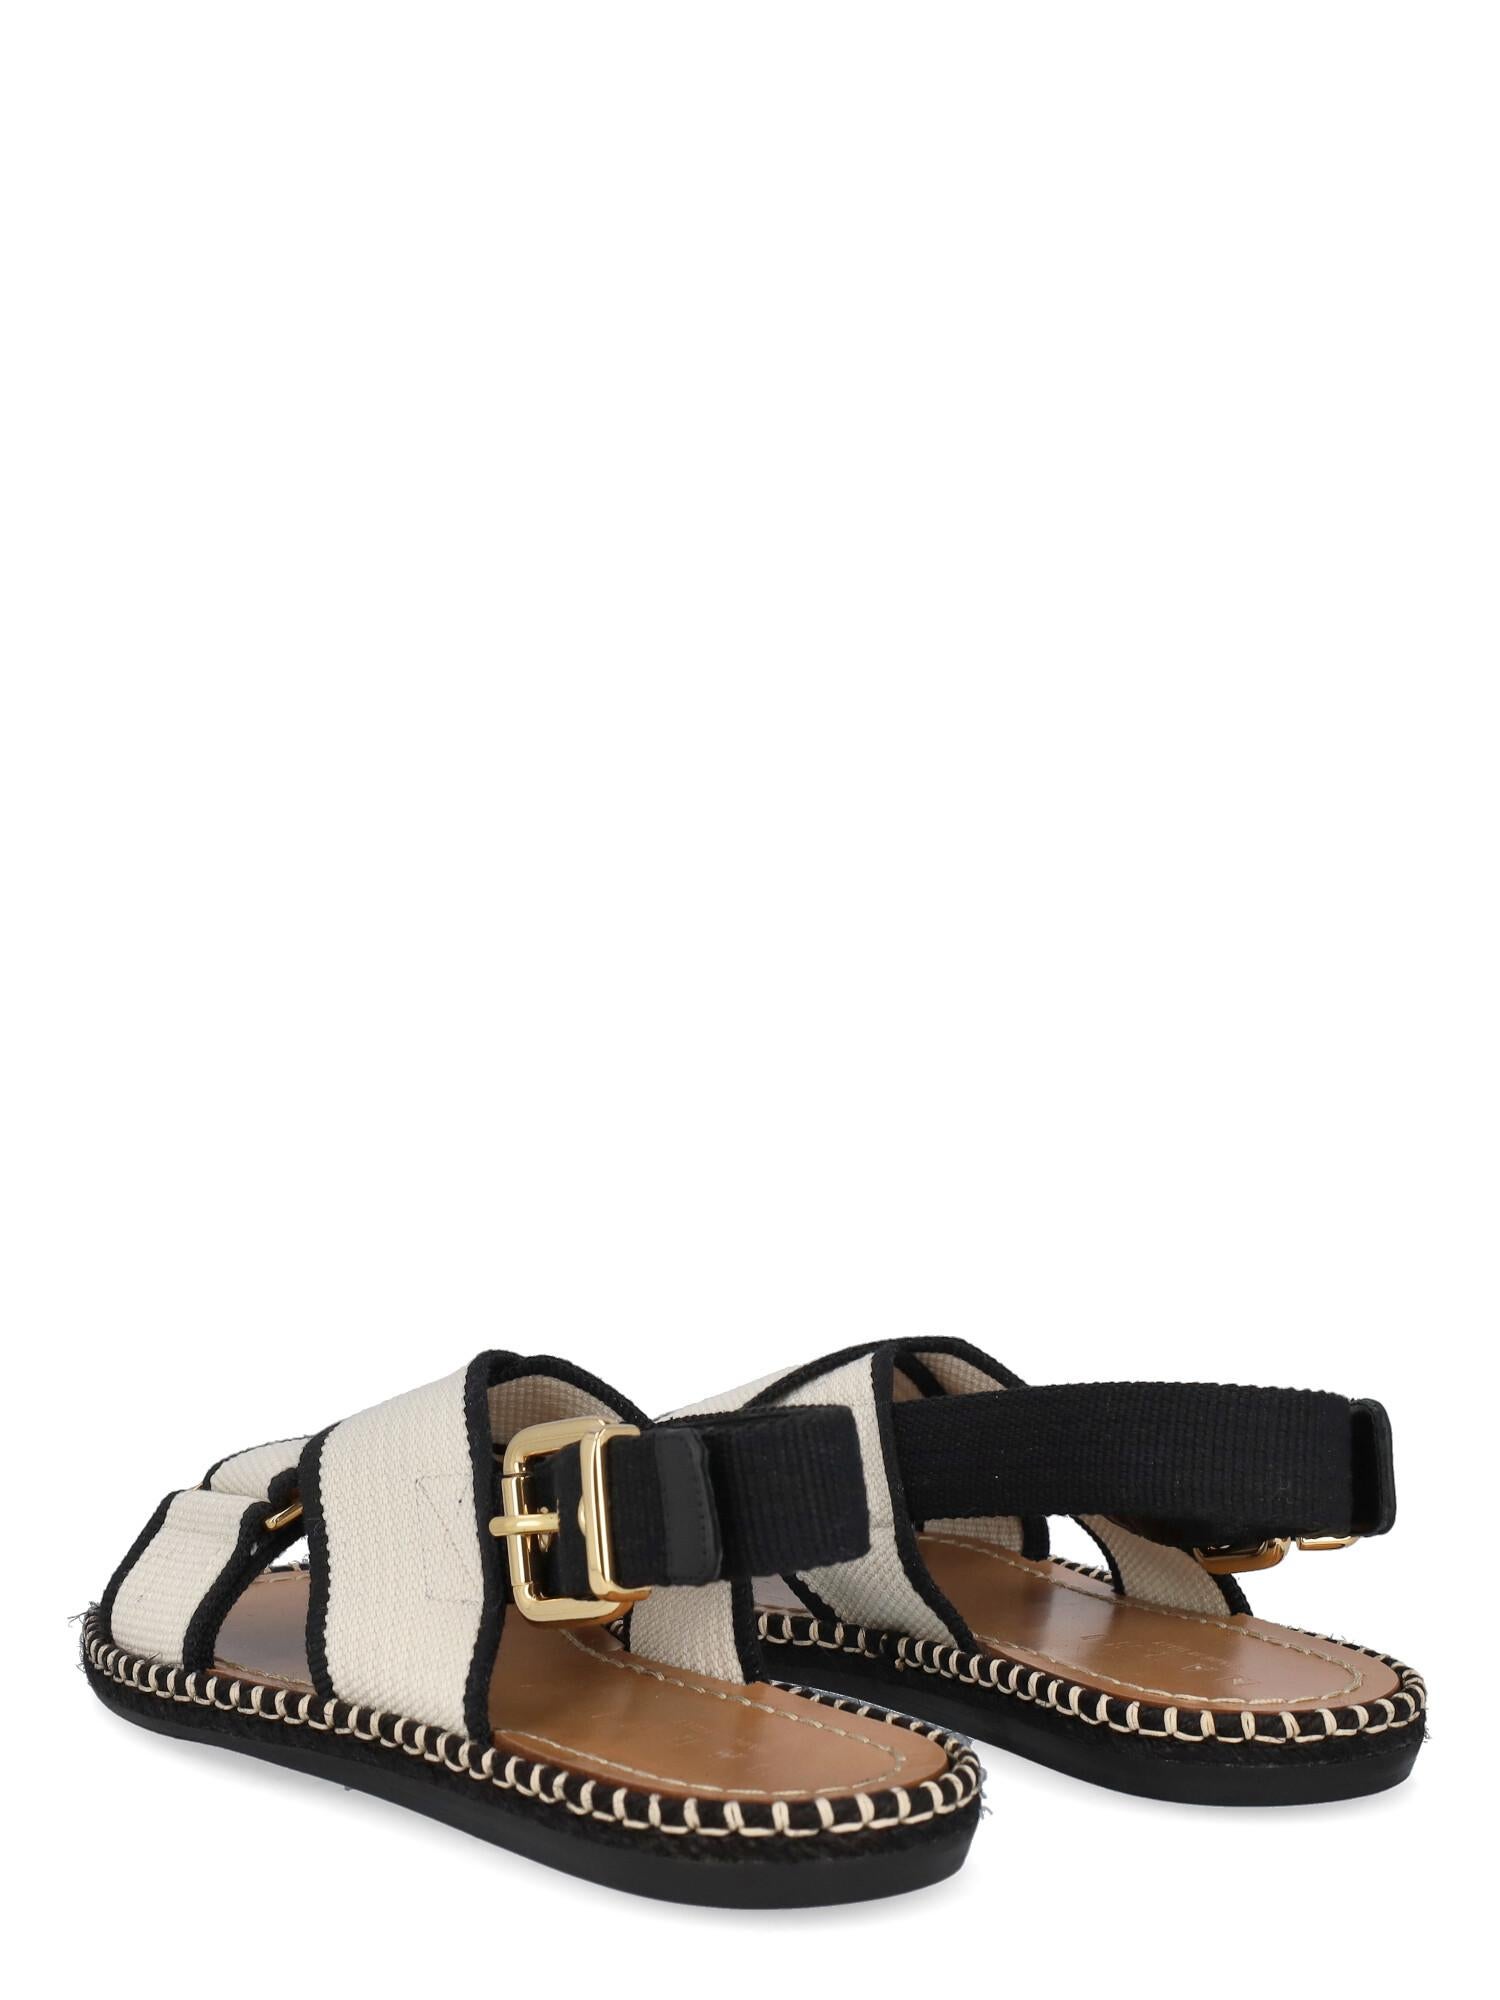 Marni Women Sandals Black, White Fabric EU 36 In Excellent Condition For Sale In Milan, IT